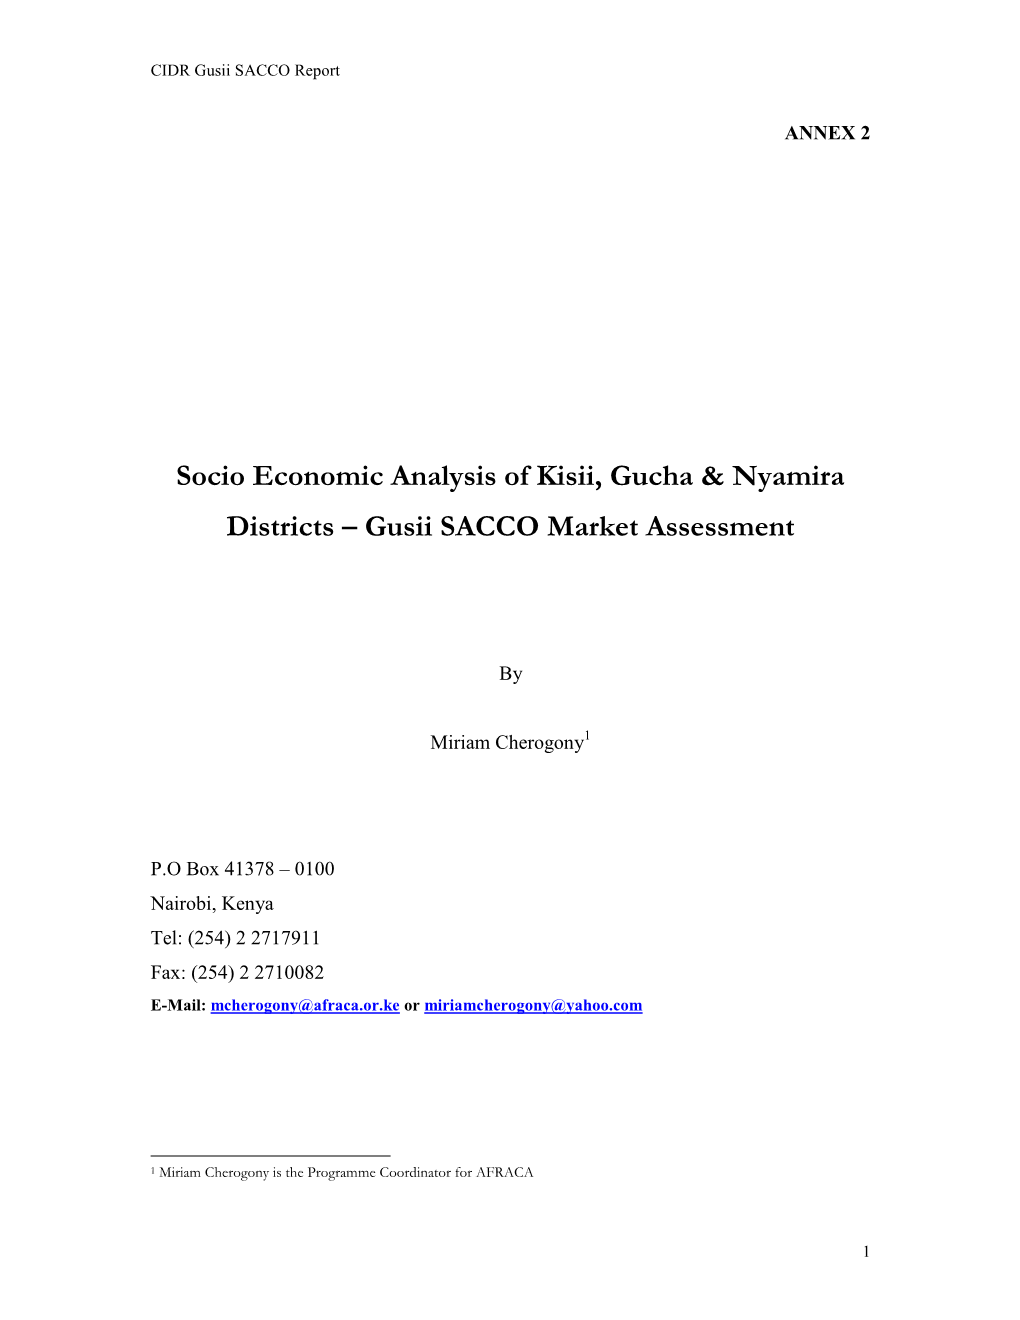 Financial Landscape in Non-Competitive Environment – A